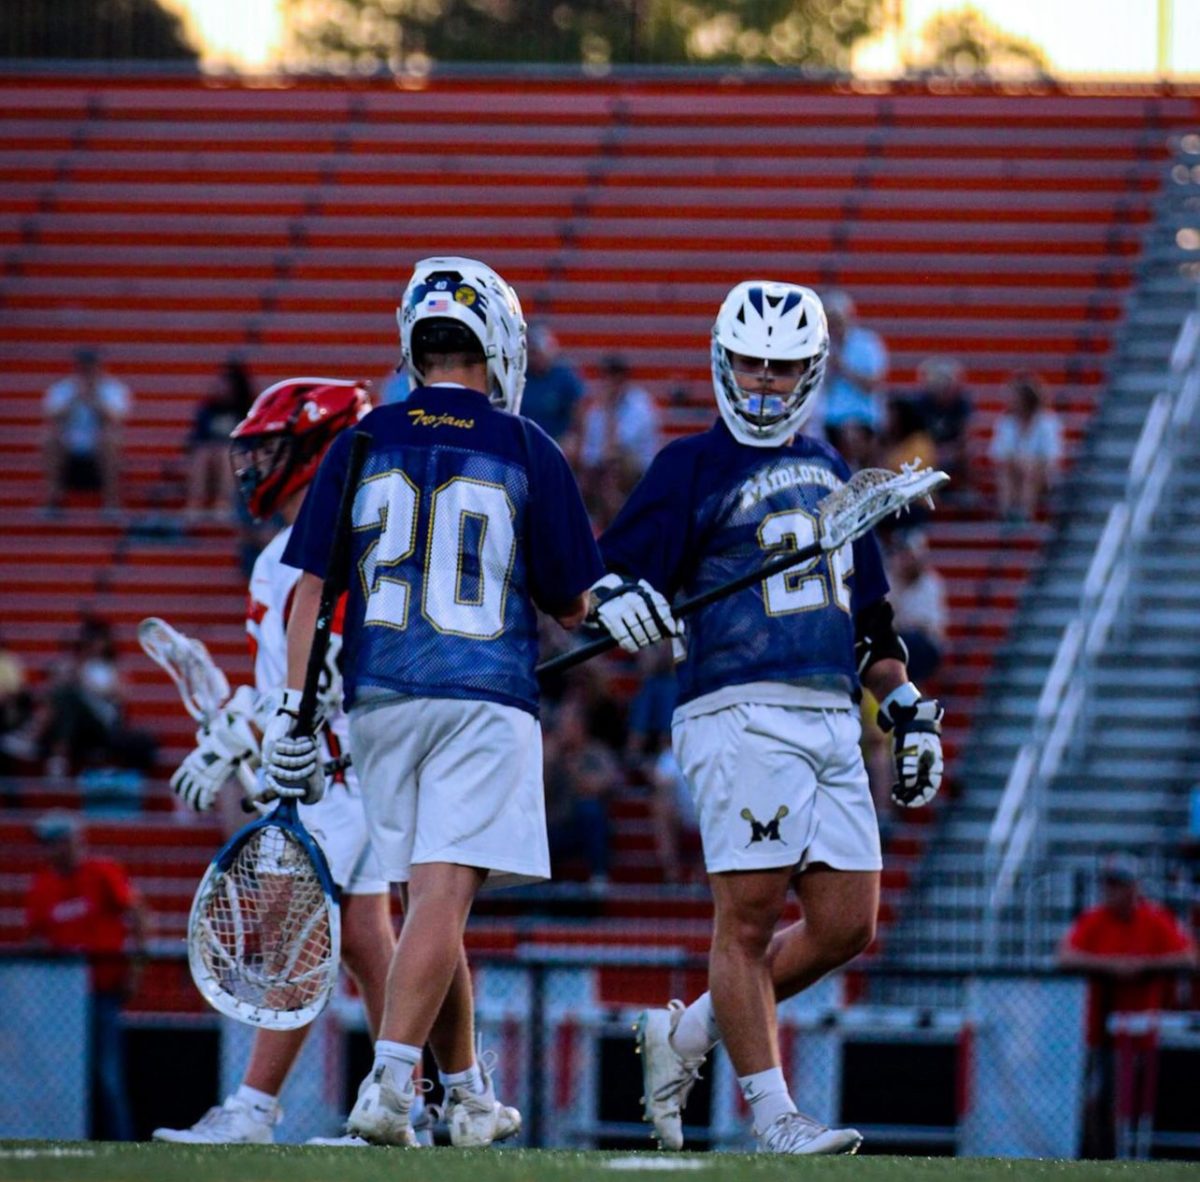 Senior Enforcer Stephen Siegel and Junior Goaltender Robert Filippone walk past each other cordially in their 16-7 road win against the Monacan Chiefs on April 29.